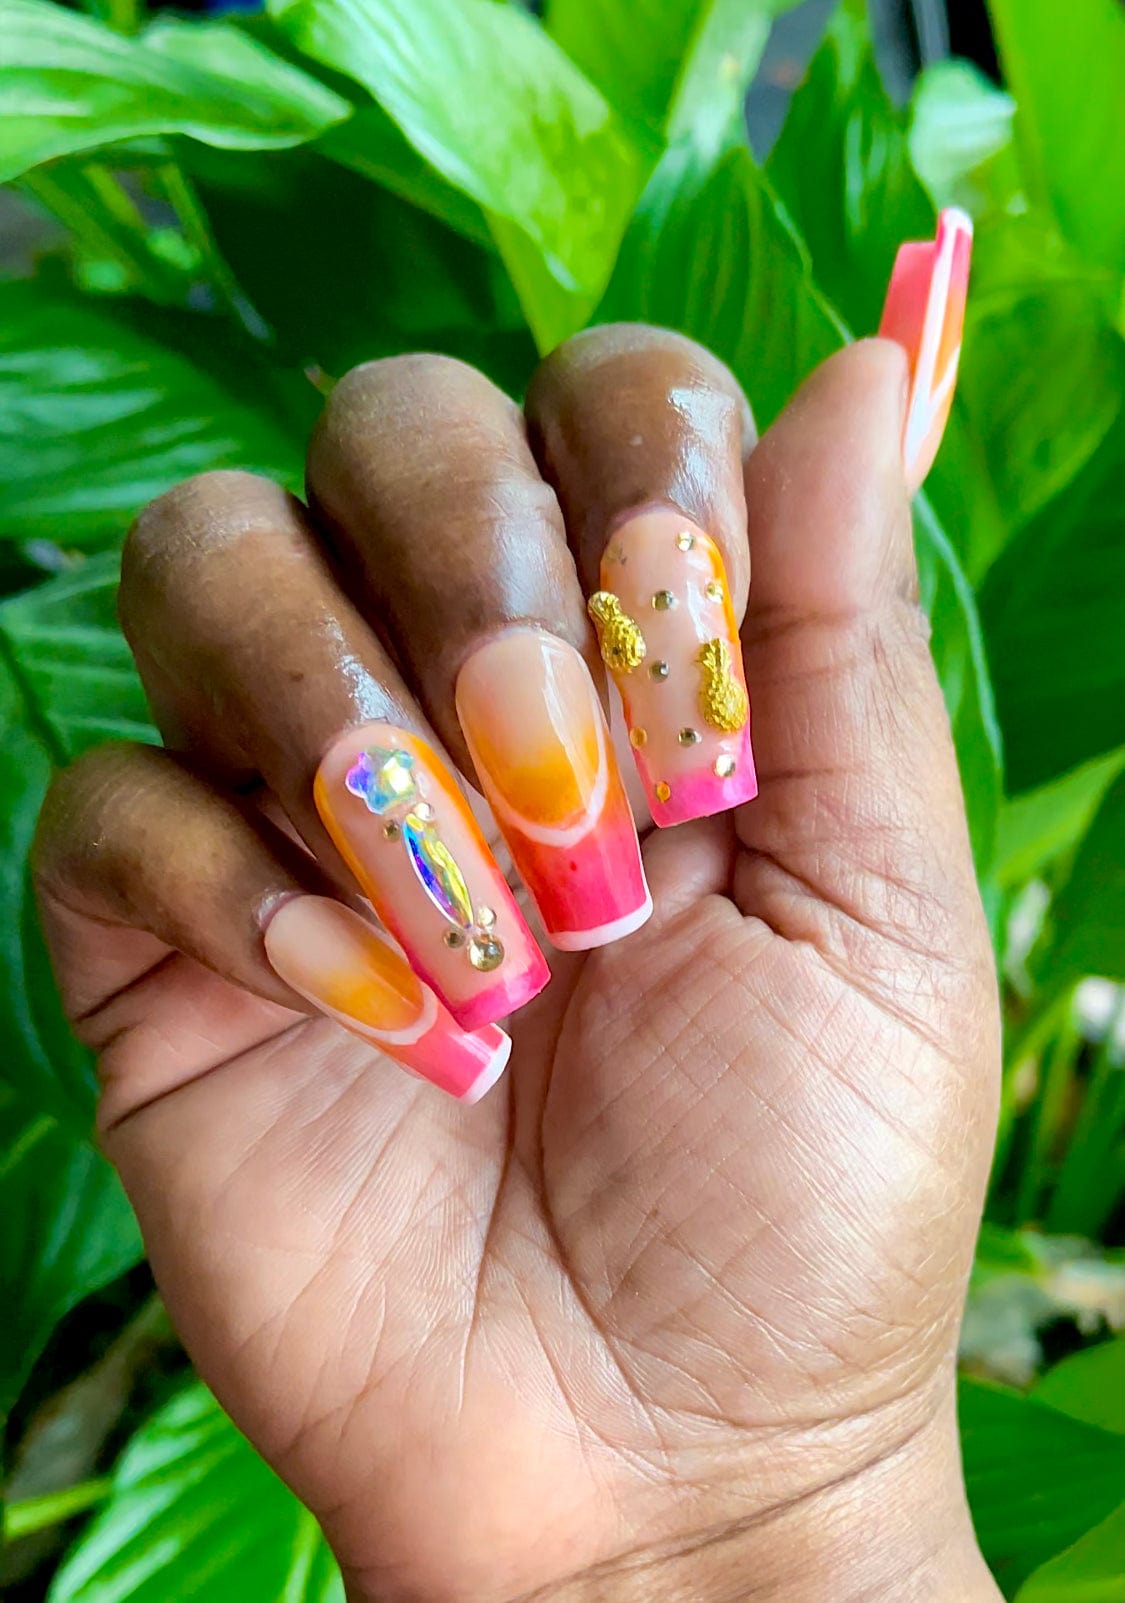 NailedByNiki2swt Beauty and Nails Vacation Vibes Press on Nails Self Care Accessories